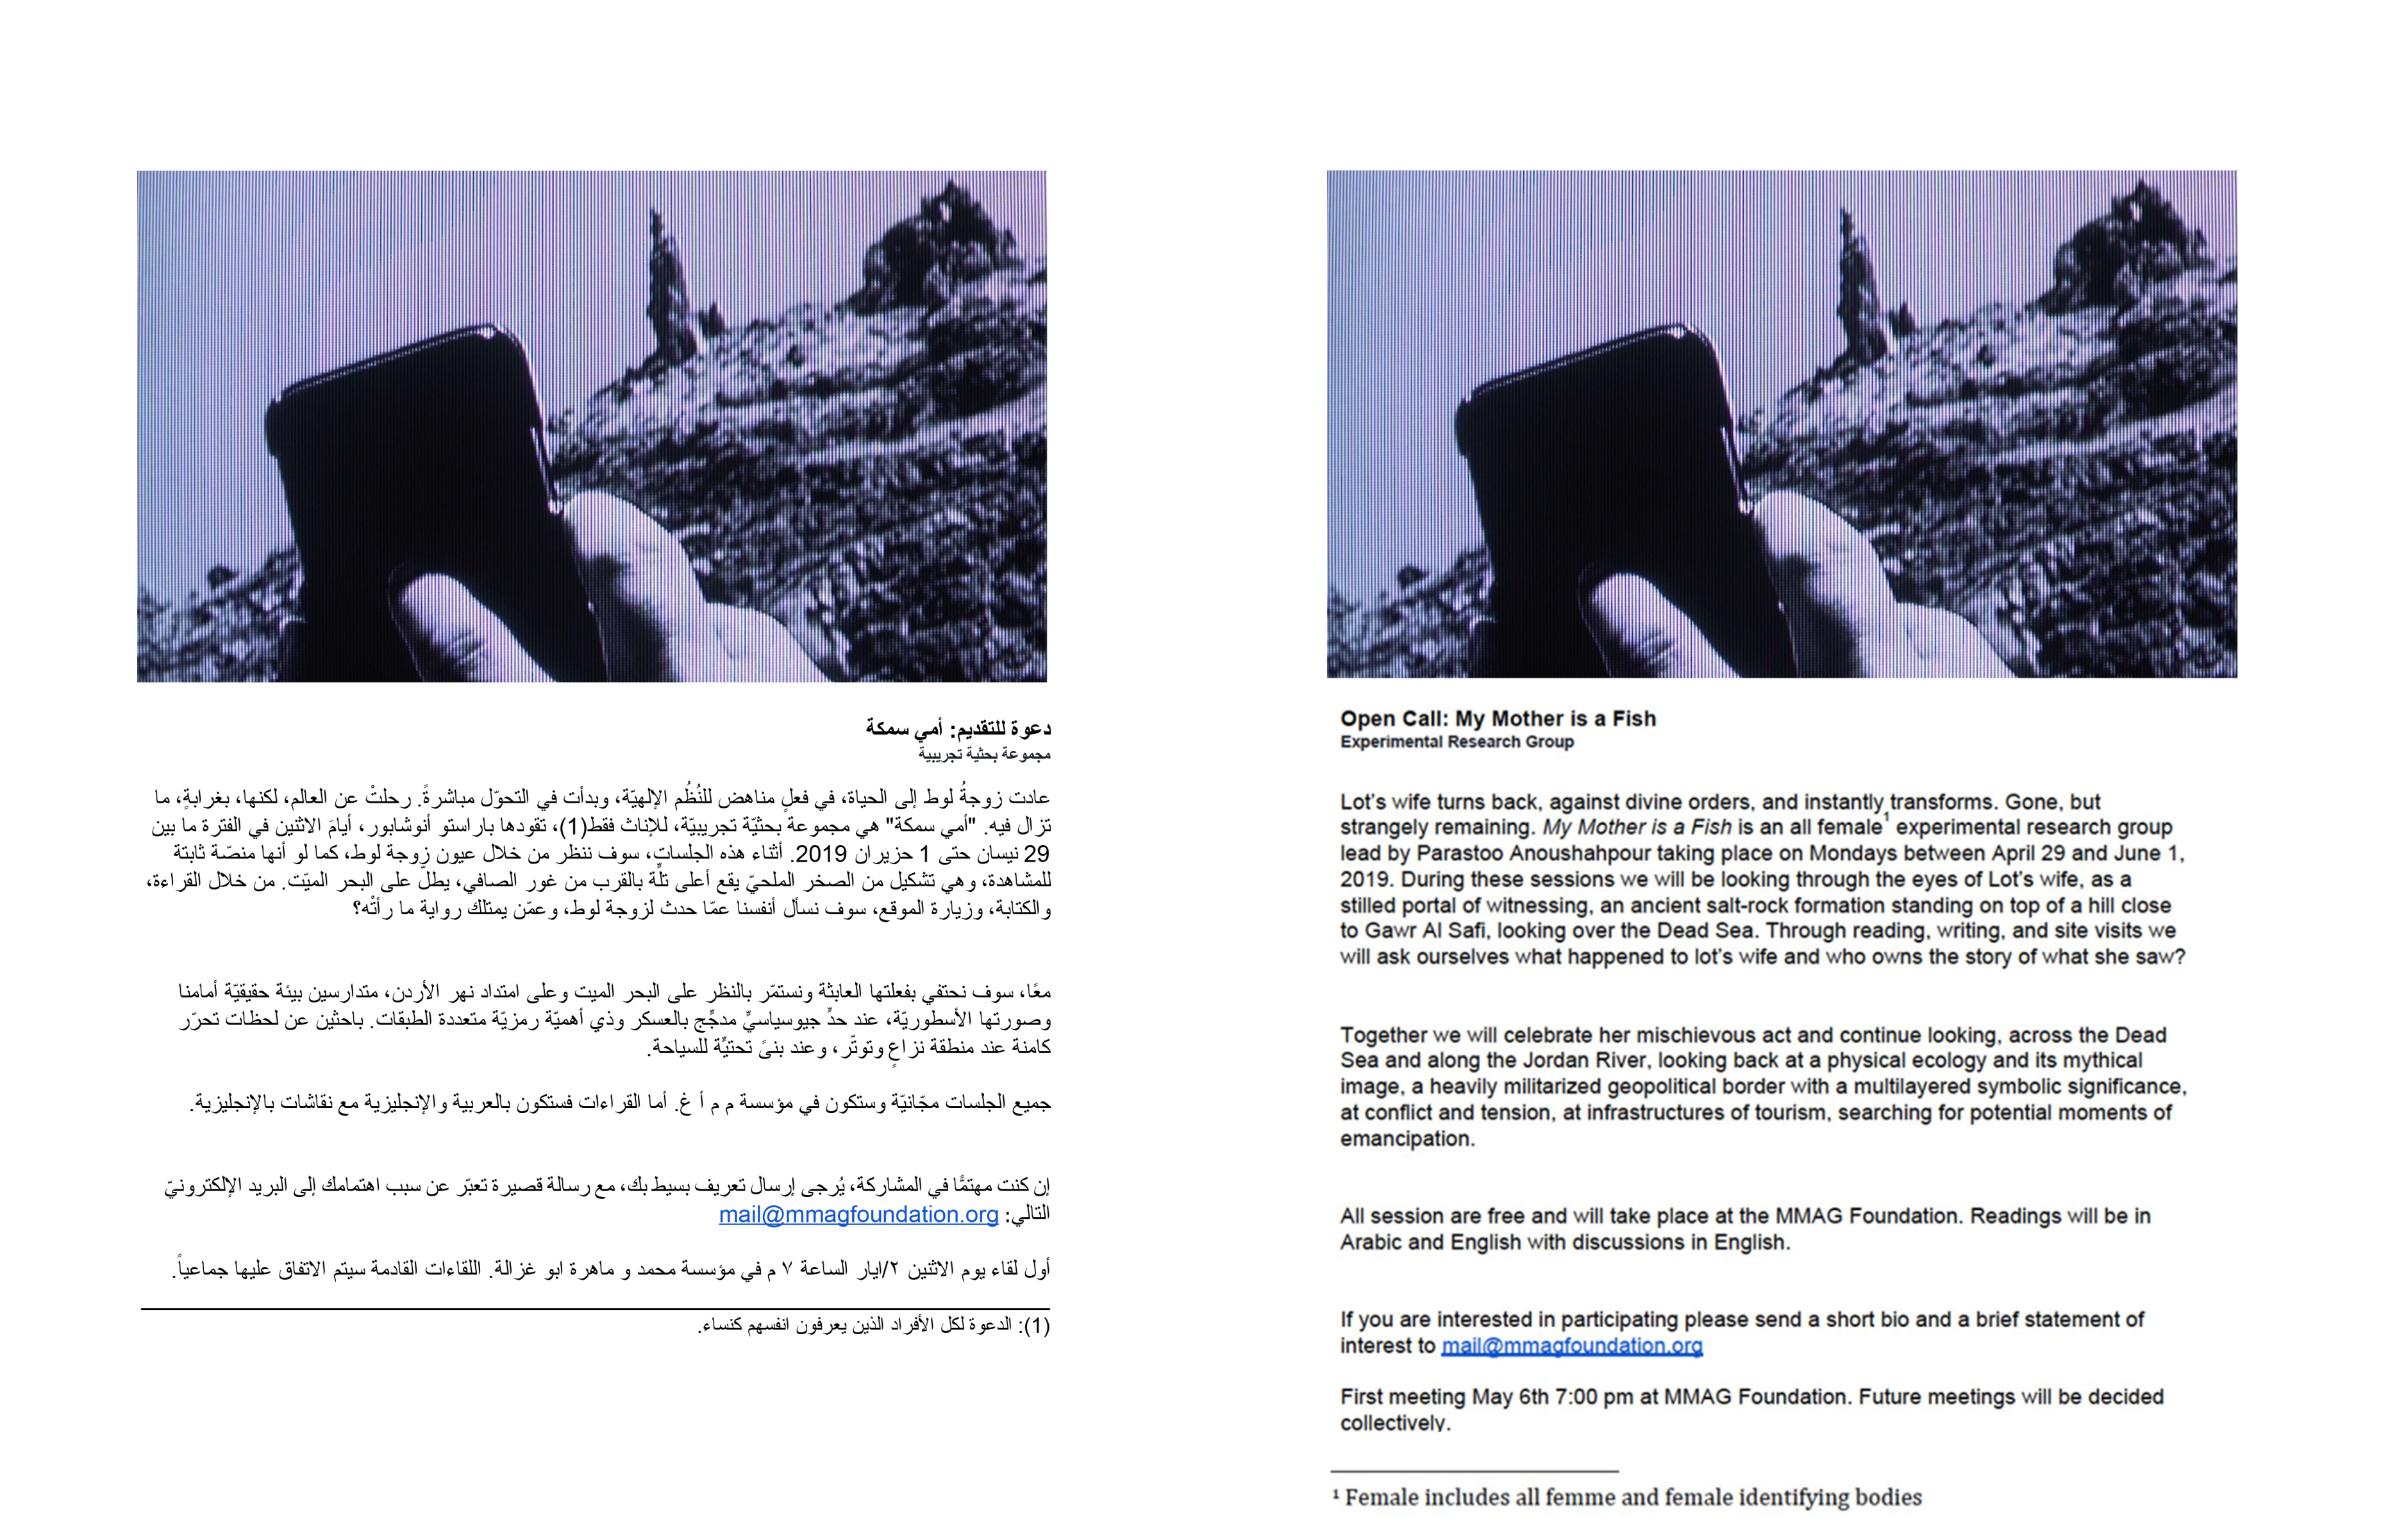 open call for an experimental research group hosted by the MMAG Foundation in Amman, Jordan. The call appears both in English and Arabic, with a black and white image of a hang taking a picture of a rock.